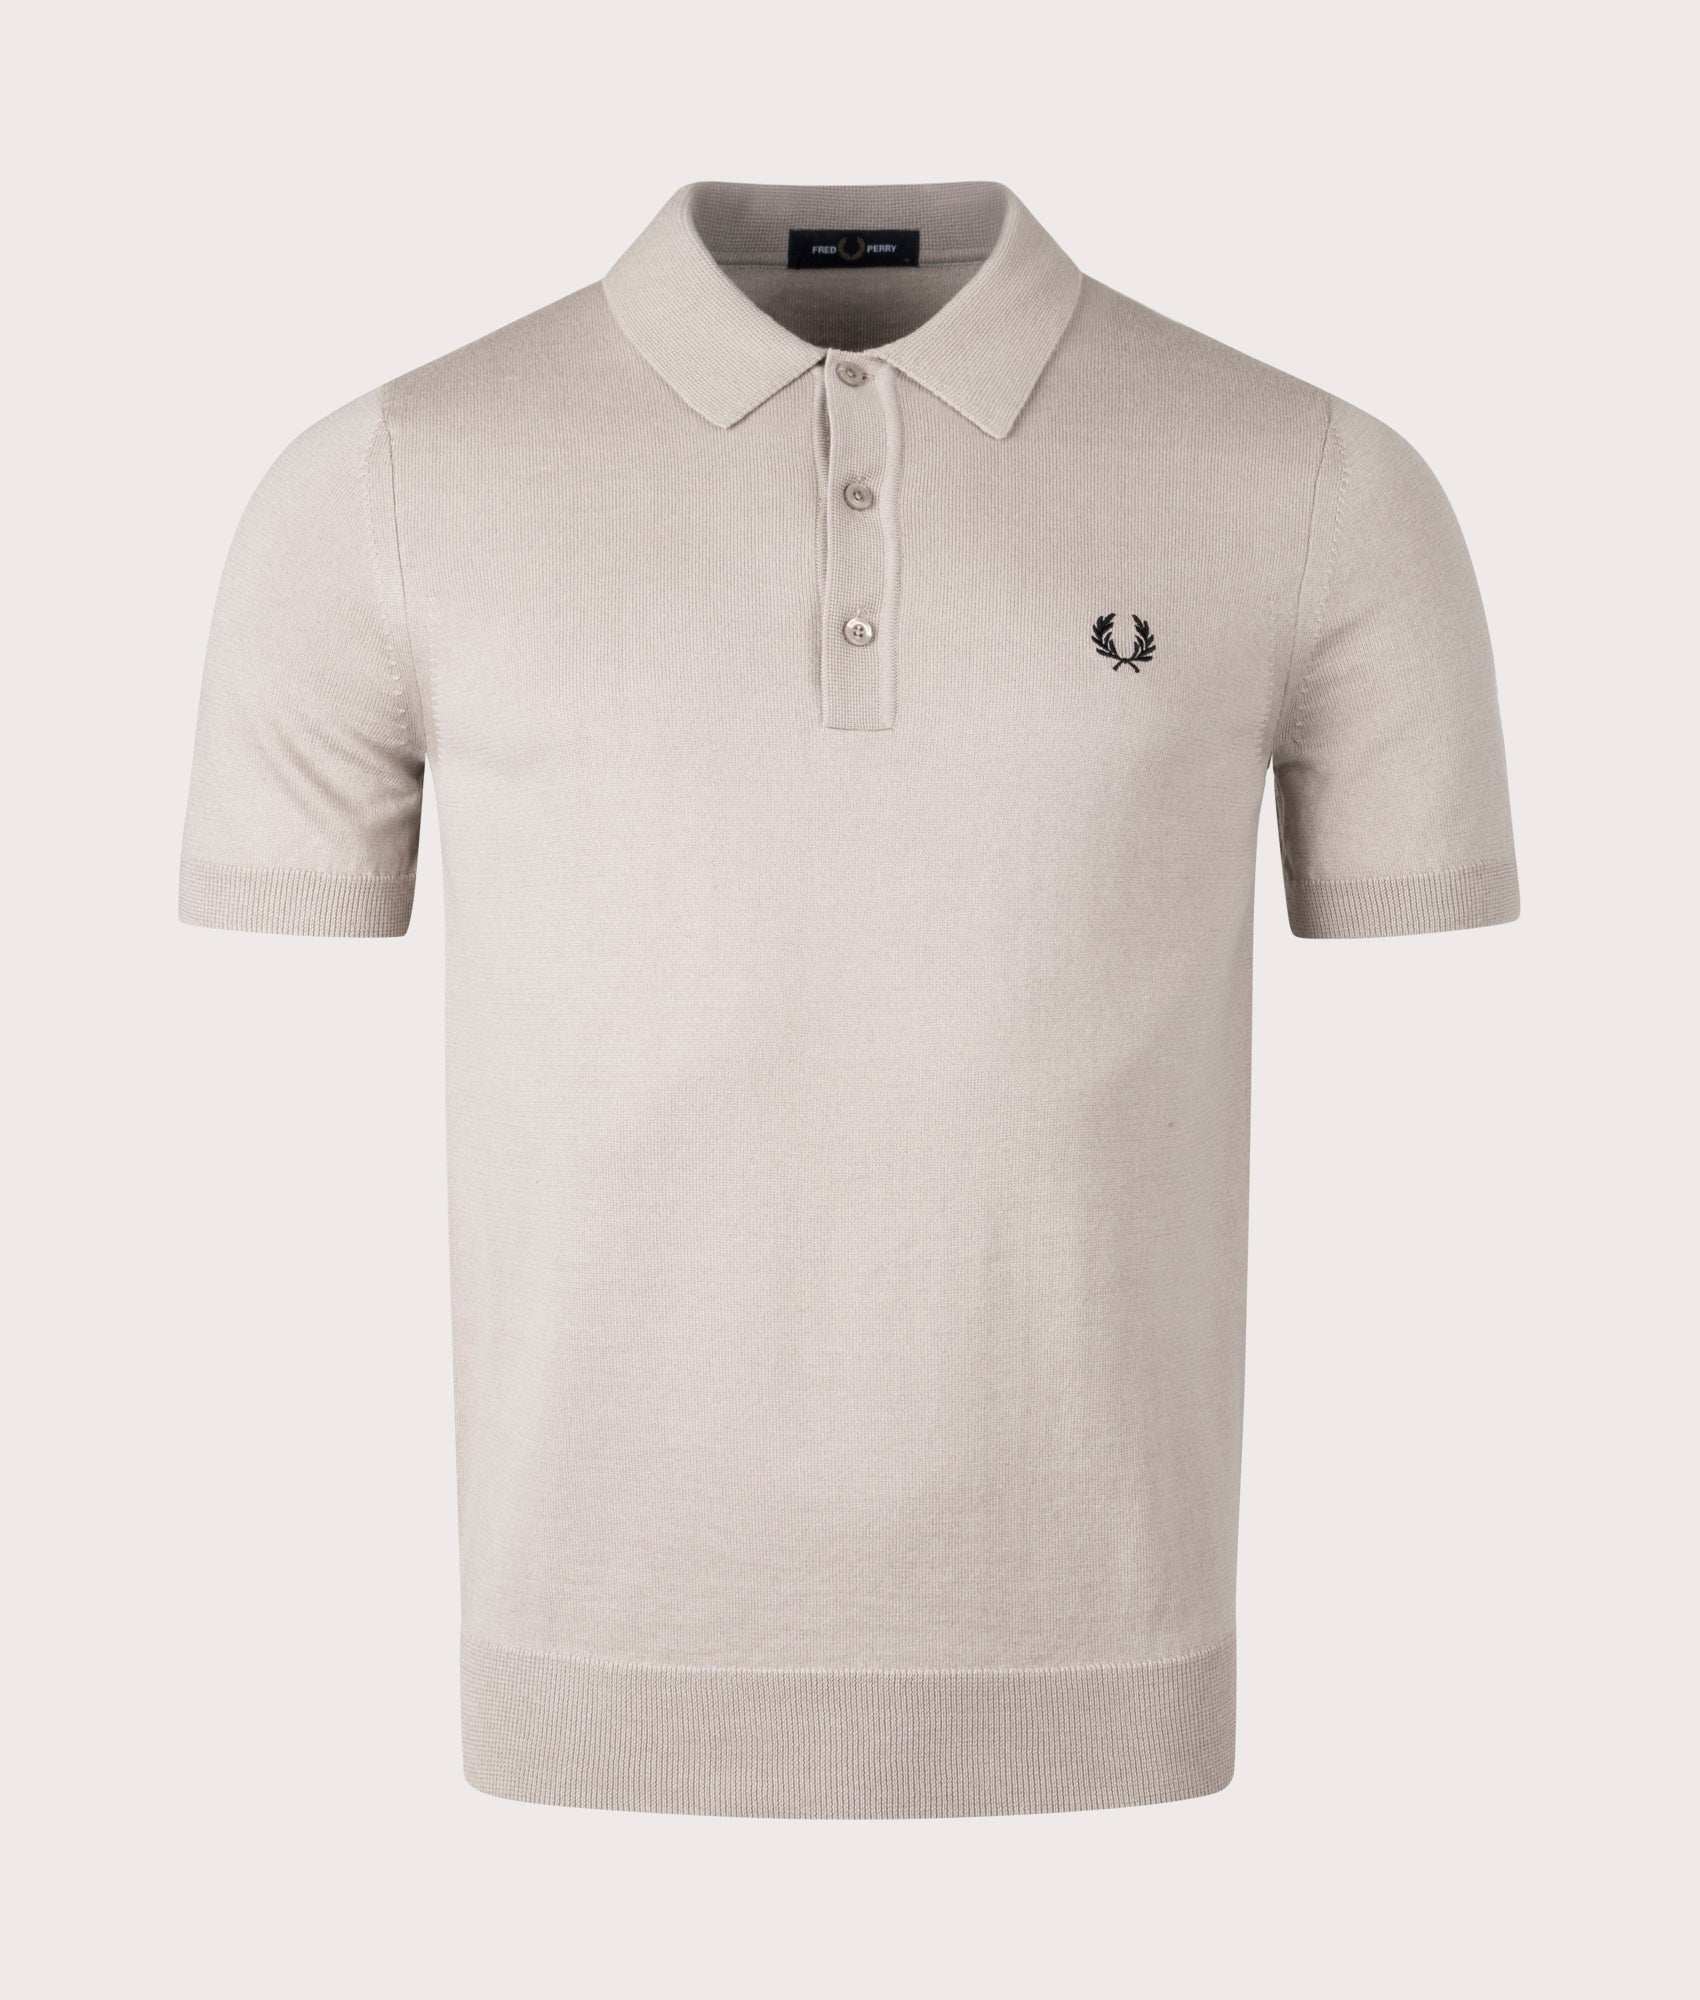 Fred Perry Mens Classic Knitted Polo Shirt - Colour: S56 Dark Oatmeal - Size: Medium